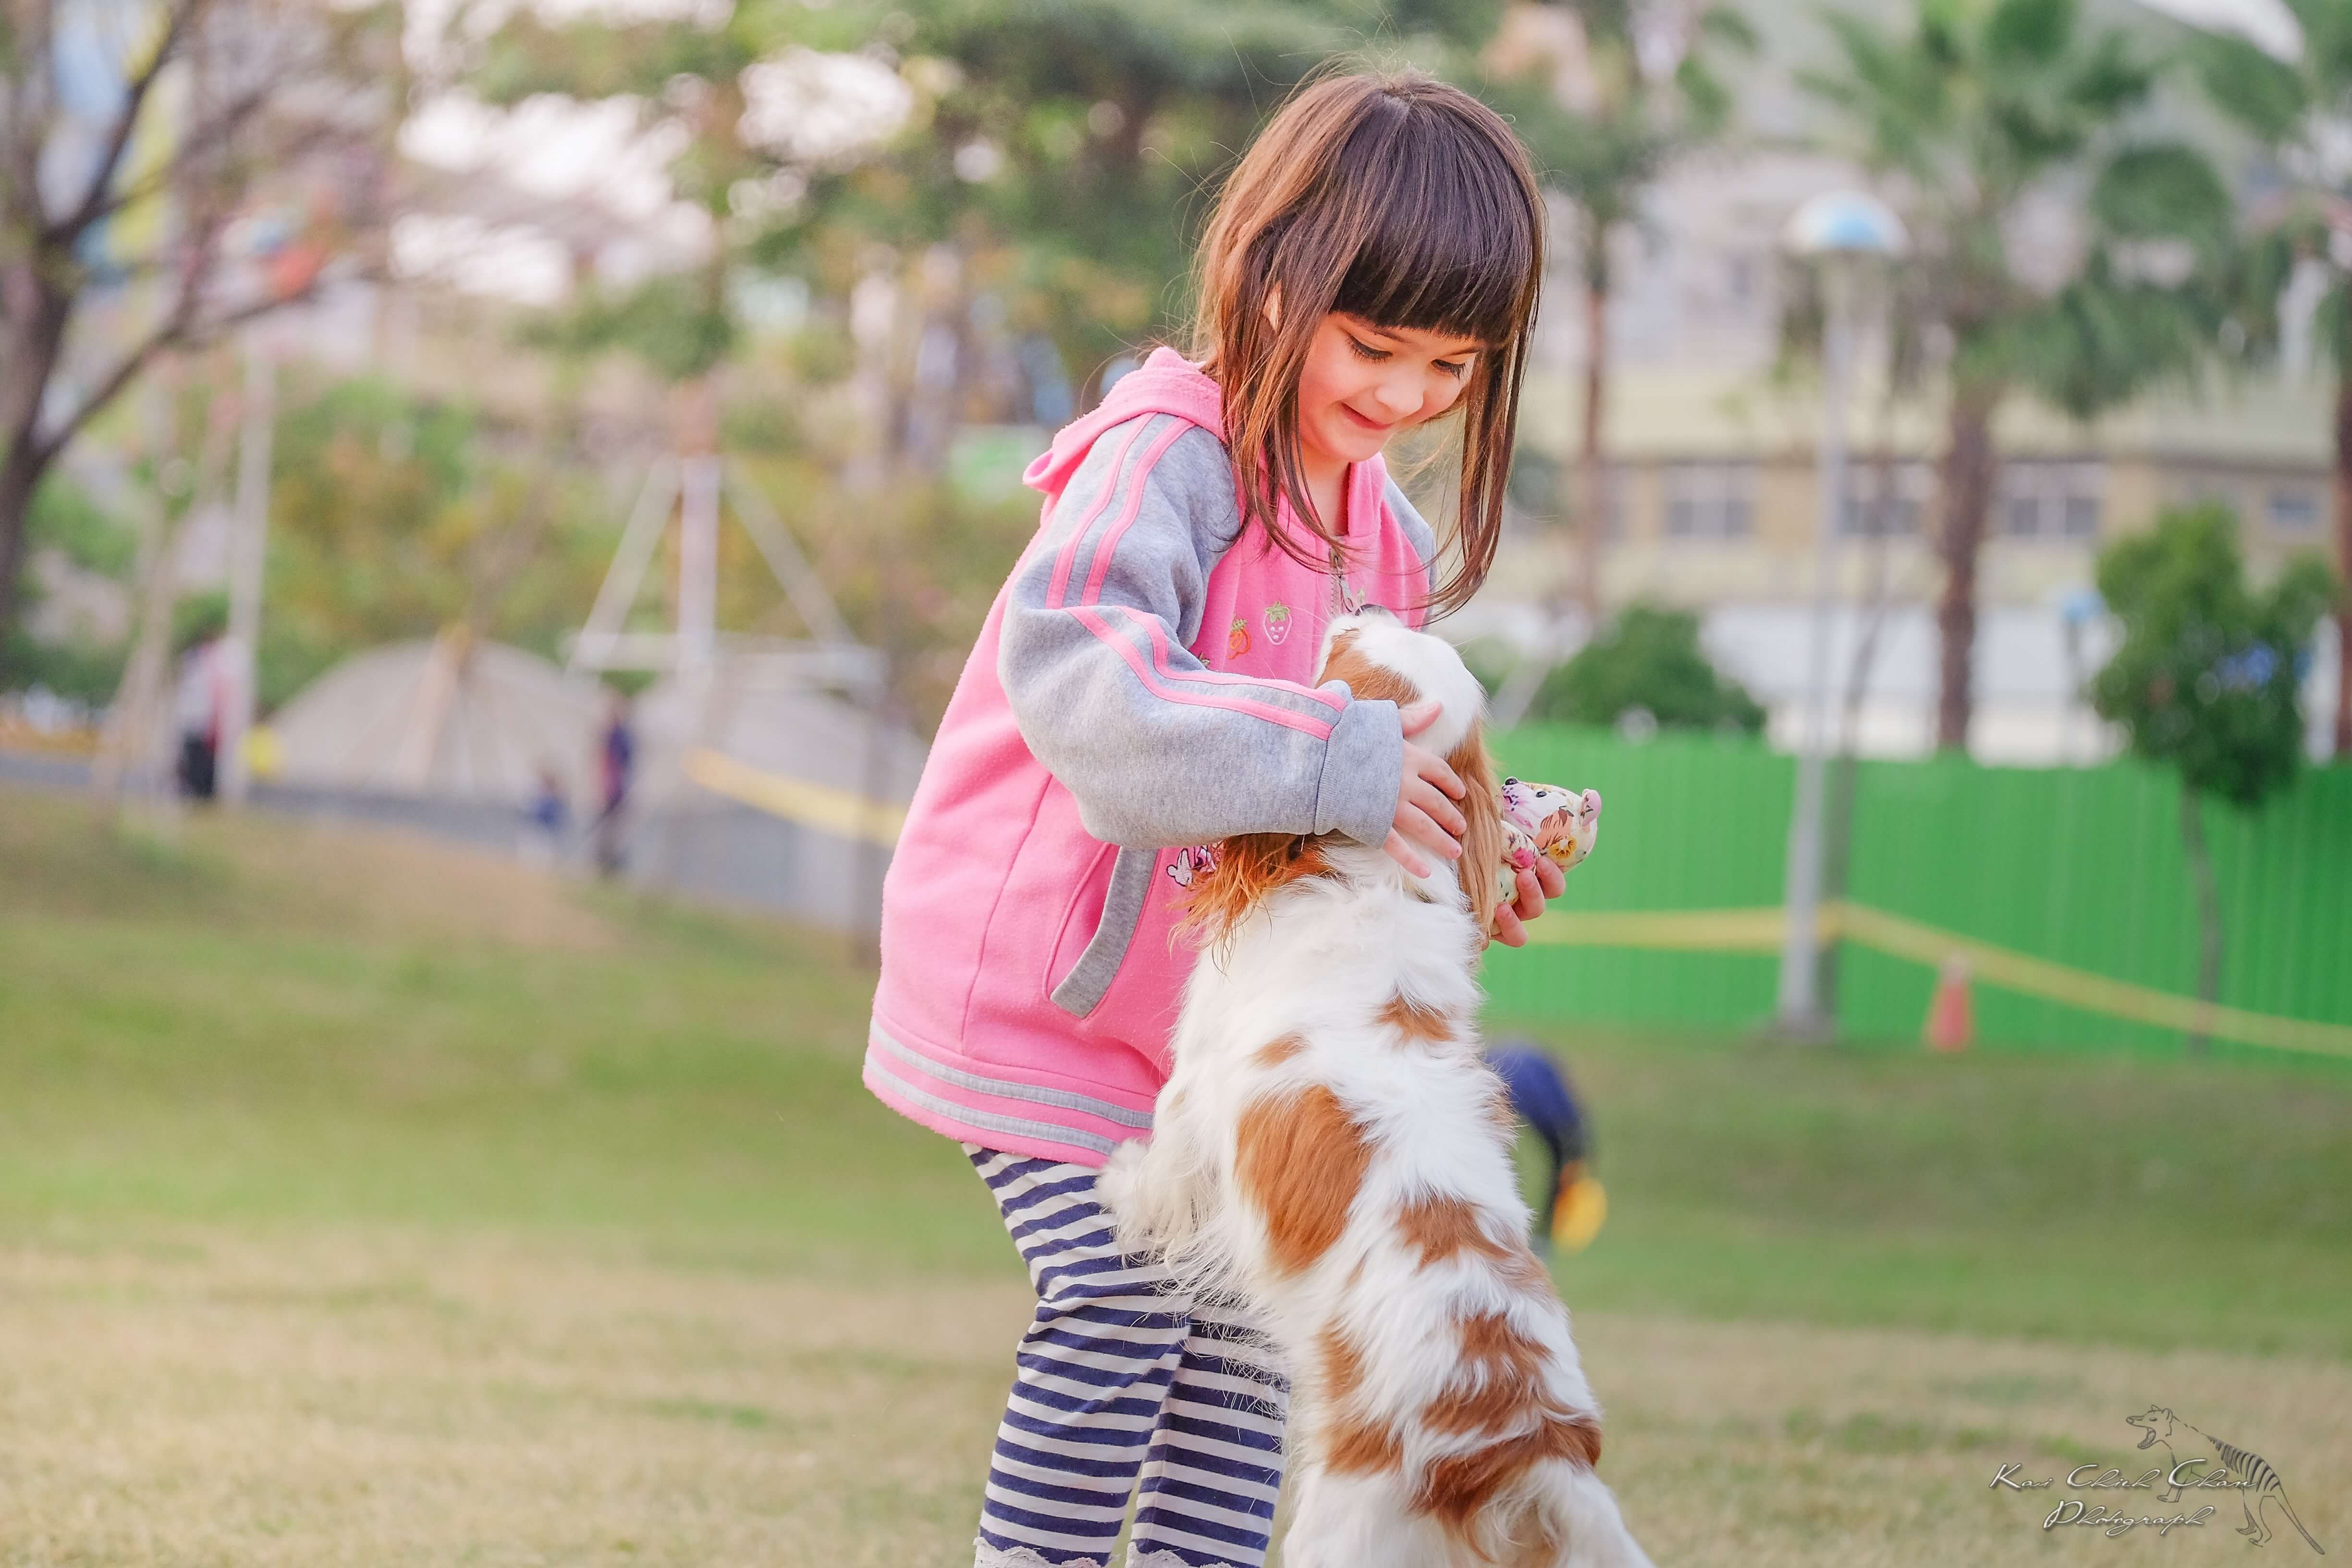 Taking Care of Pets: Life Lessons For Children. | elephant journal